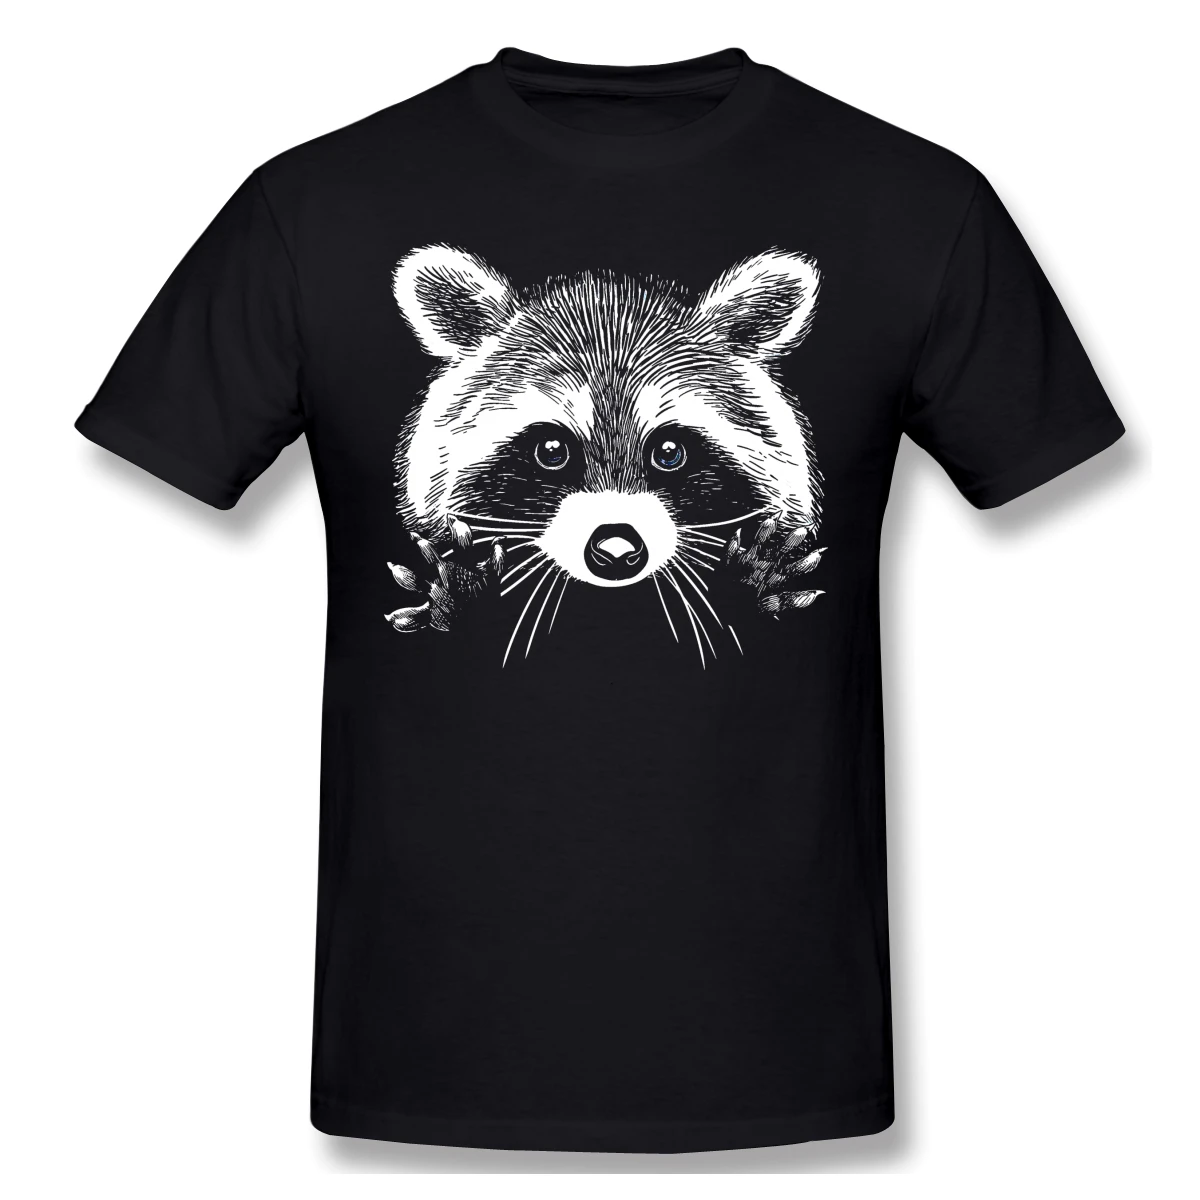 The Americans T-Shirts for Men Little Raccoon Buddy Funny Crewneck Cotton T Shirt